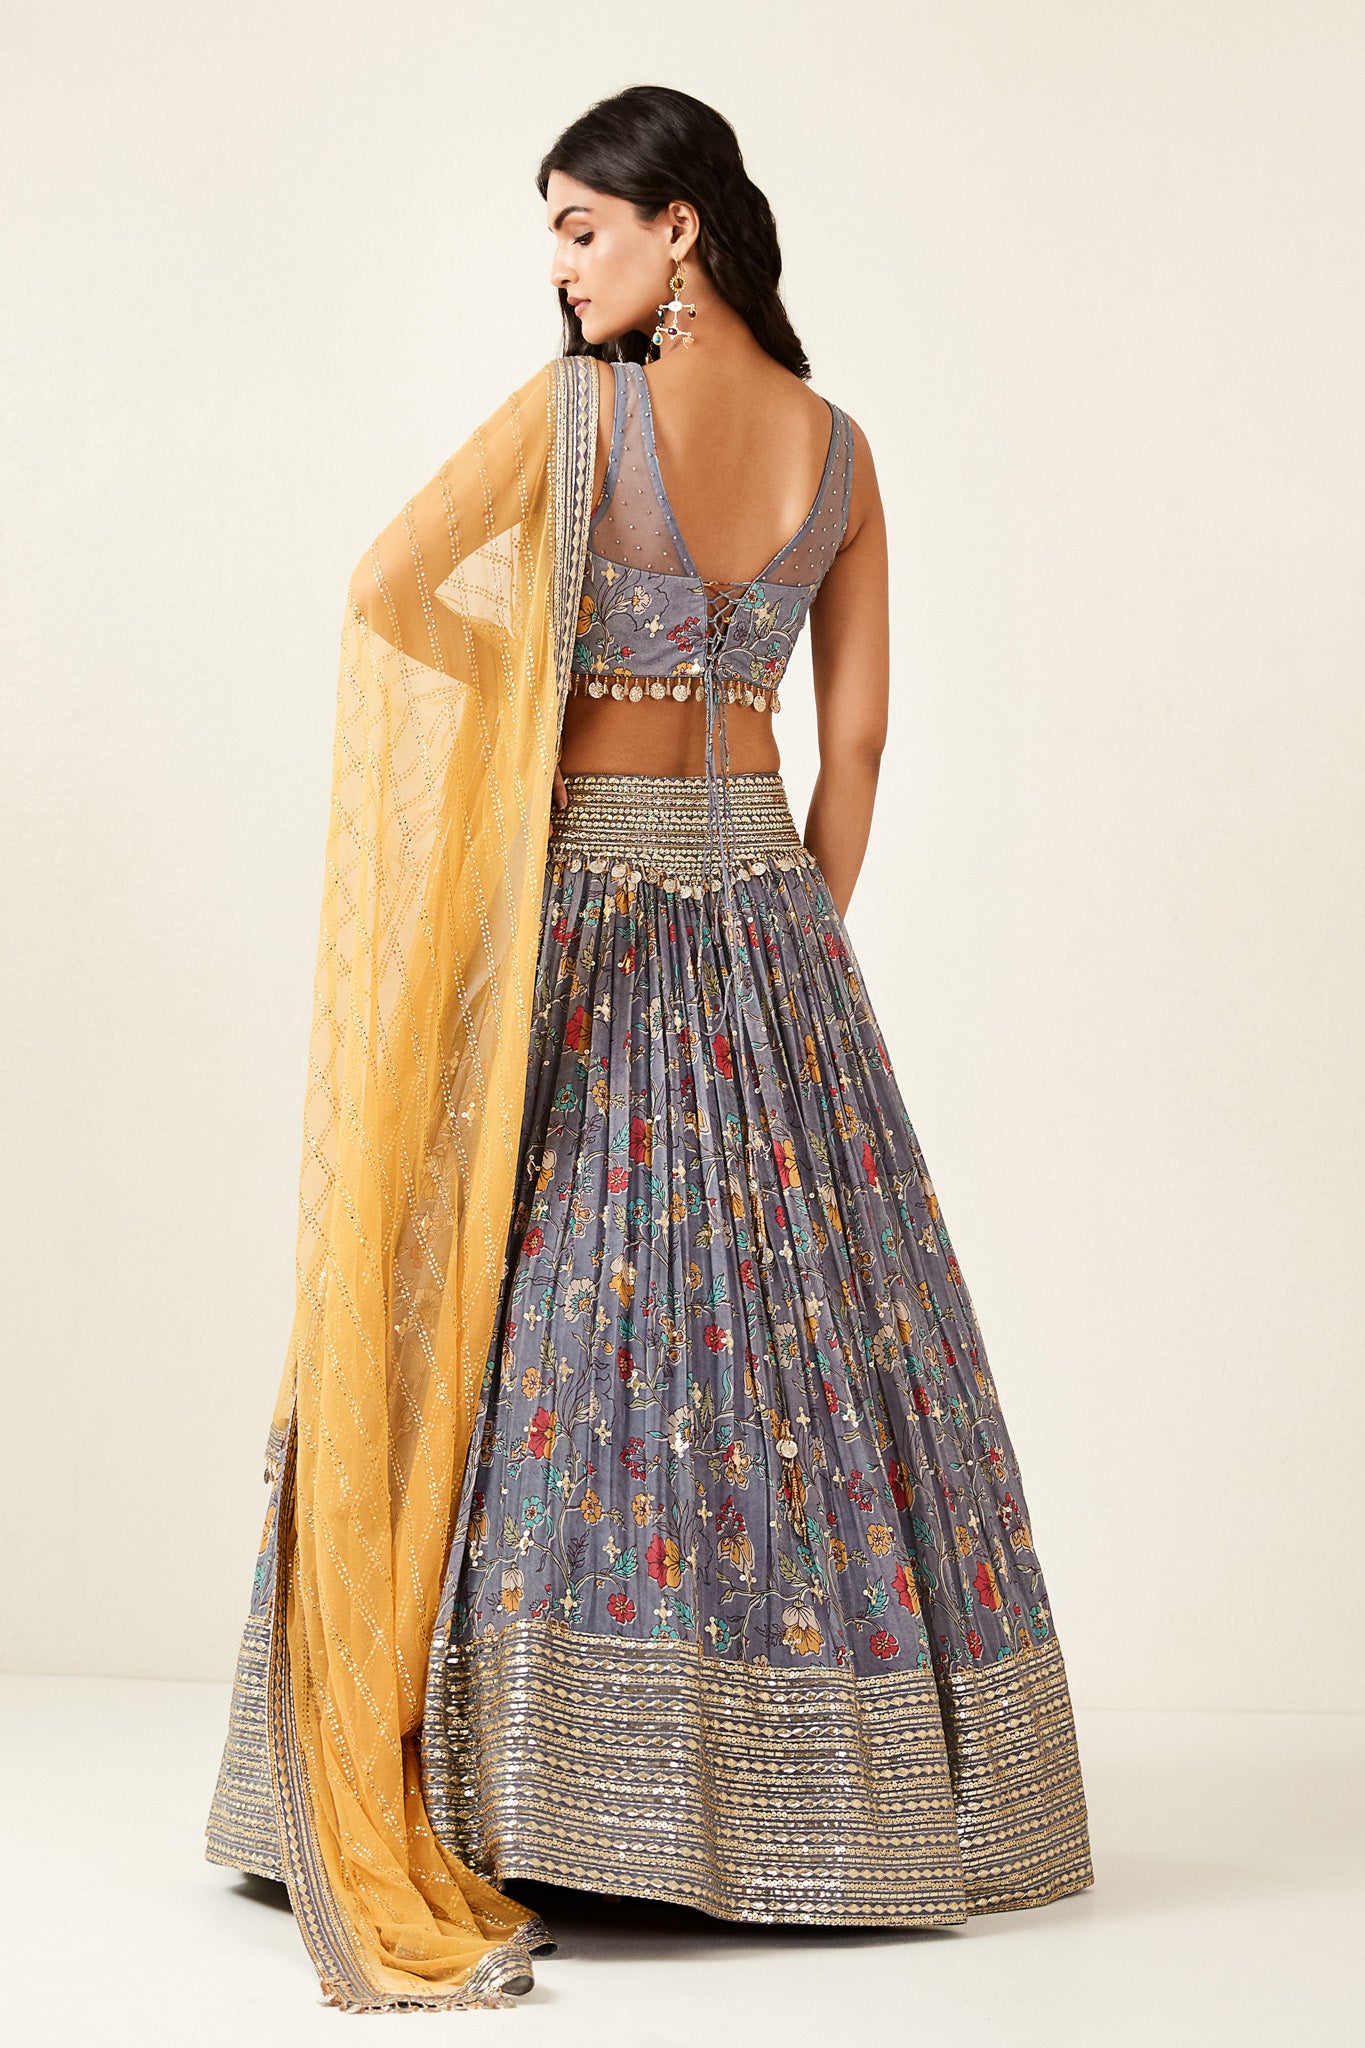 Shop look your best on wedding occasions in this beautiful grey color lehenga with hand embroidery, cut dana, and a beautiful blouse. Dazzle on weddings and special occasions with exquisite Indian designer dresses, sharara suits, Anarkali suits, bridal lehengas, and sharara suits from Pure Elegance Indian clothing store in the USA. Shop online from Pure Elegance.